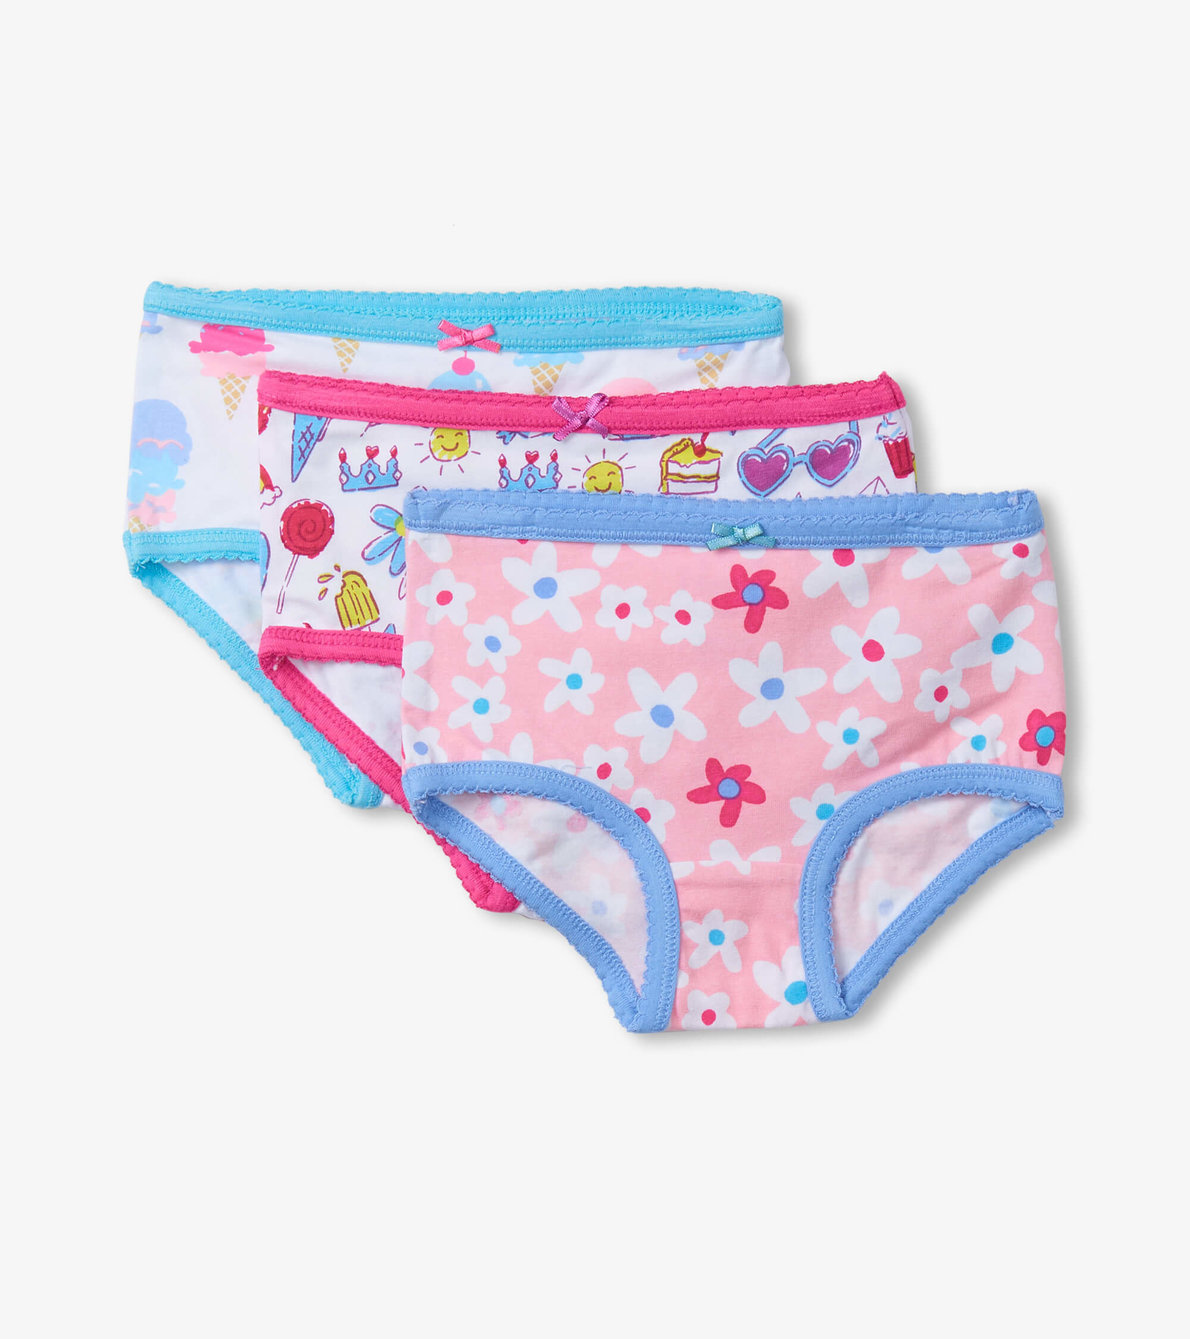 View larger image of Summer Prints Girls Hipster Underwear 3 Pack